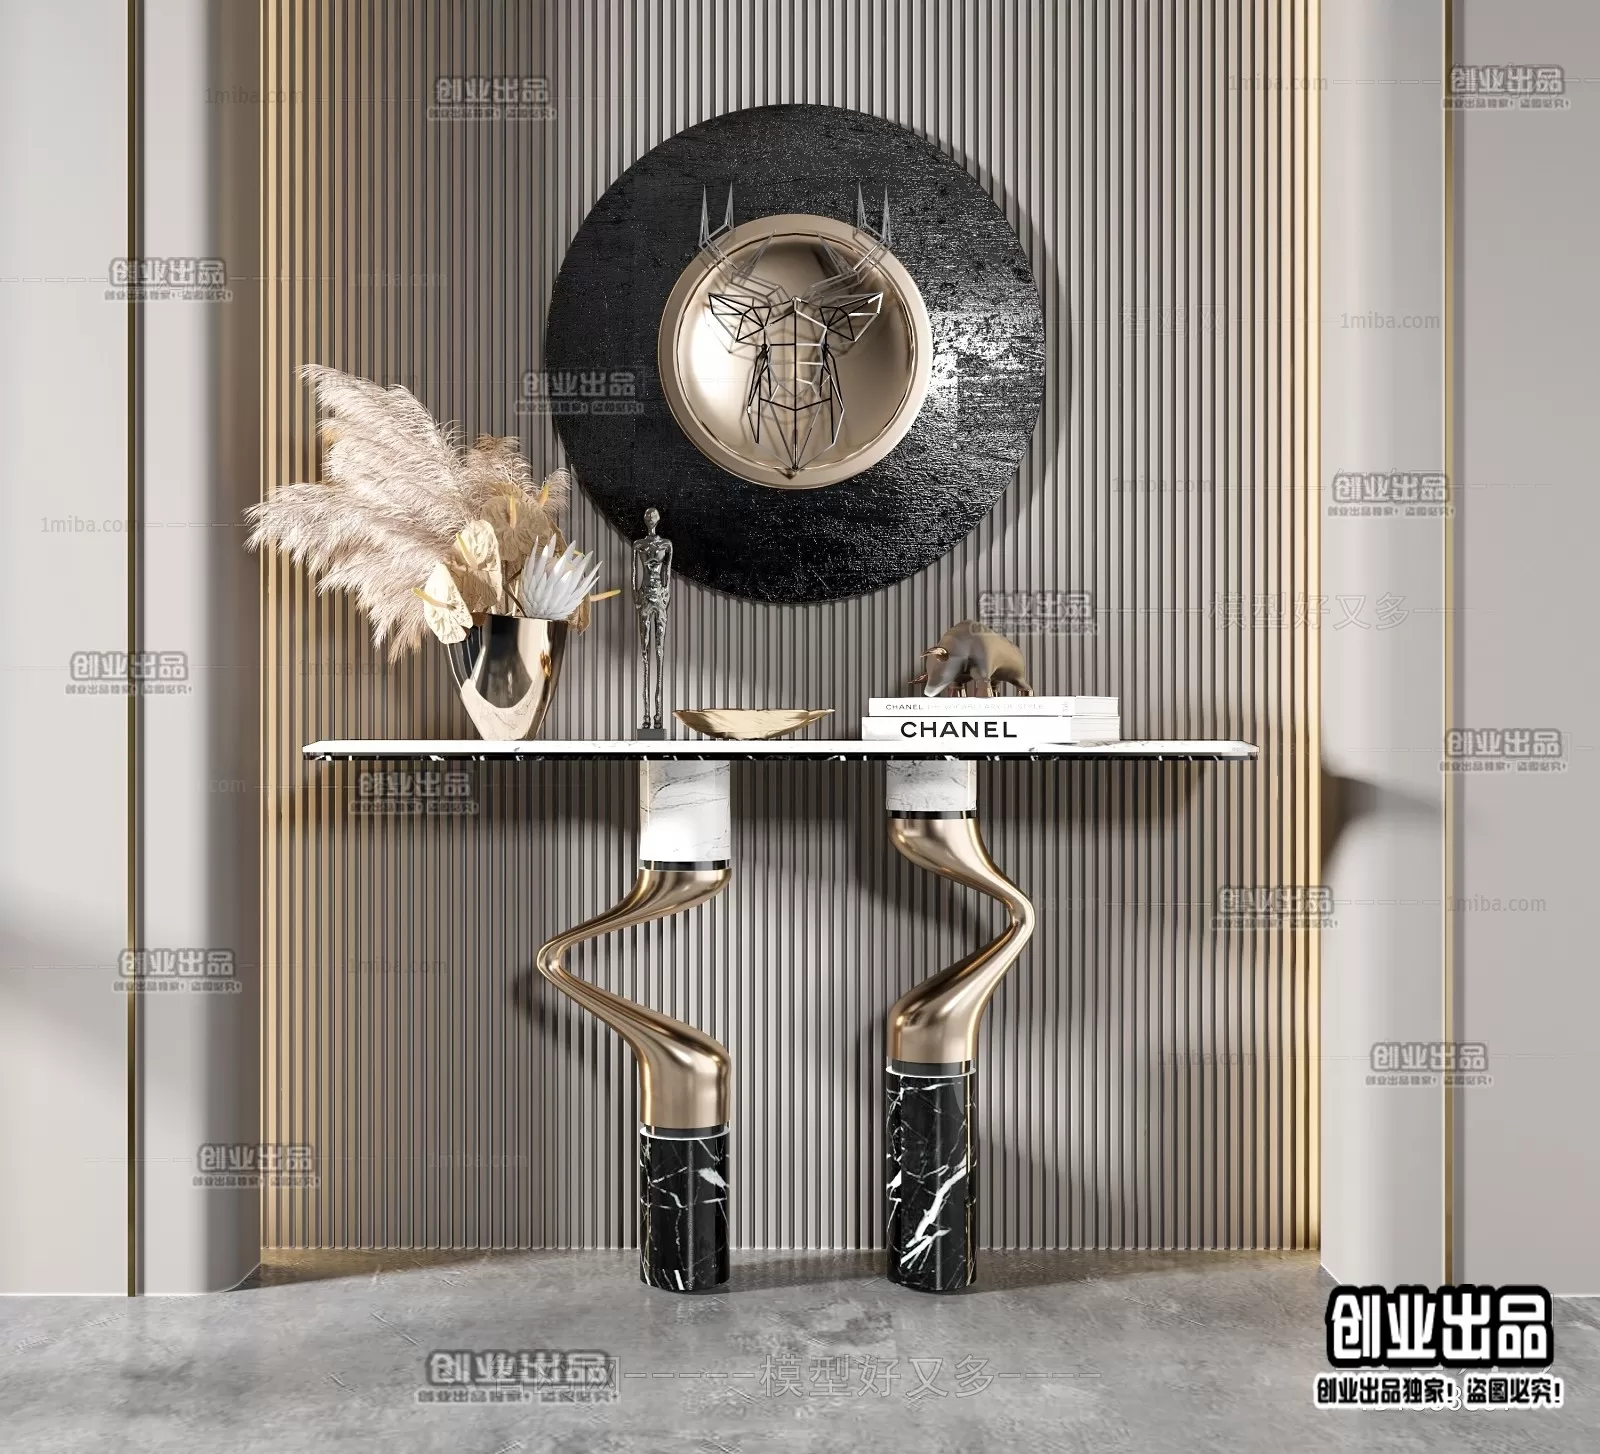 CONSOLE TABLE – 35 – FURNITURE 3D MODELS 2022 (VRAY)